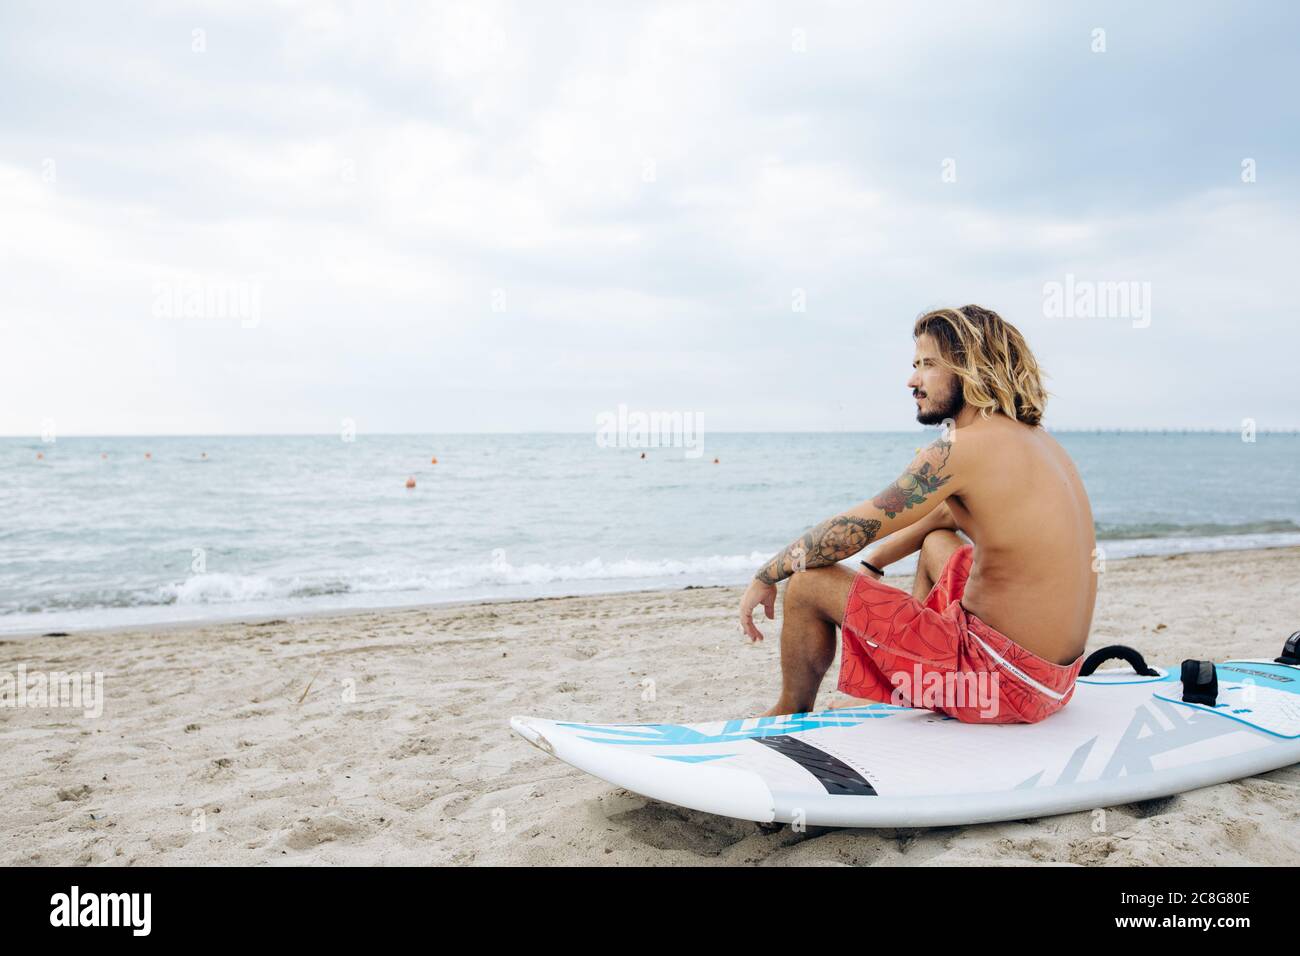 Surfer with surfboard by seaside Stock Photo